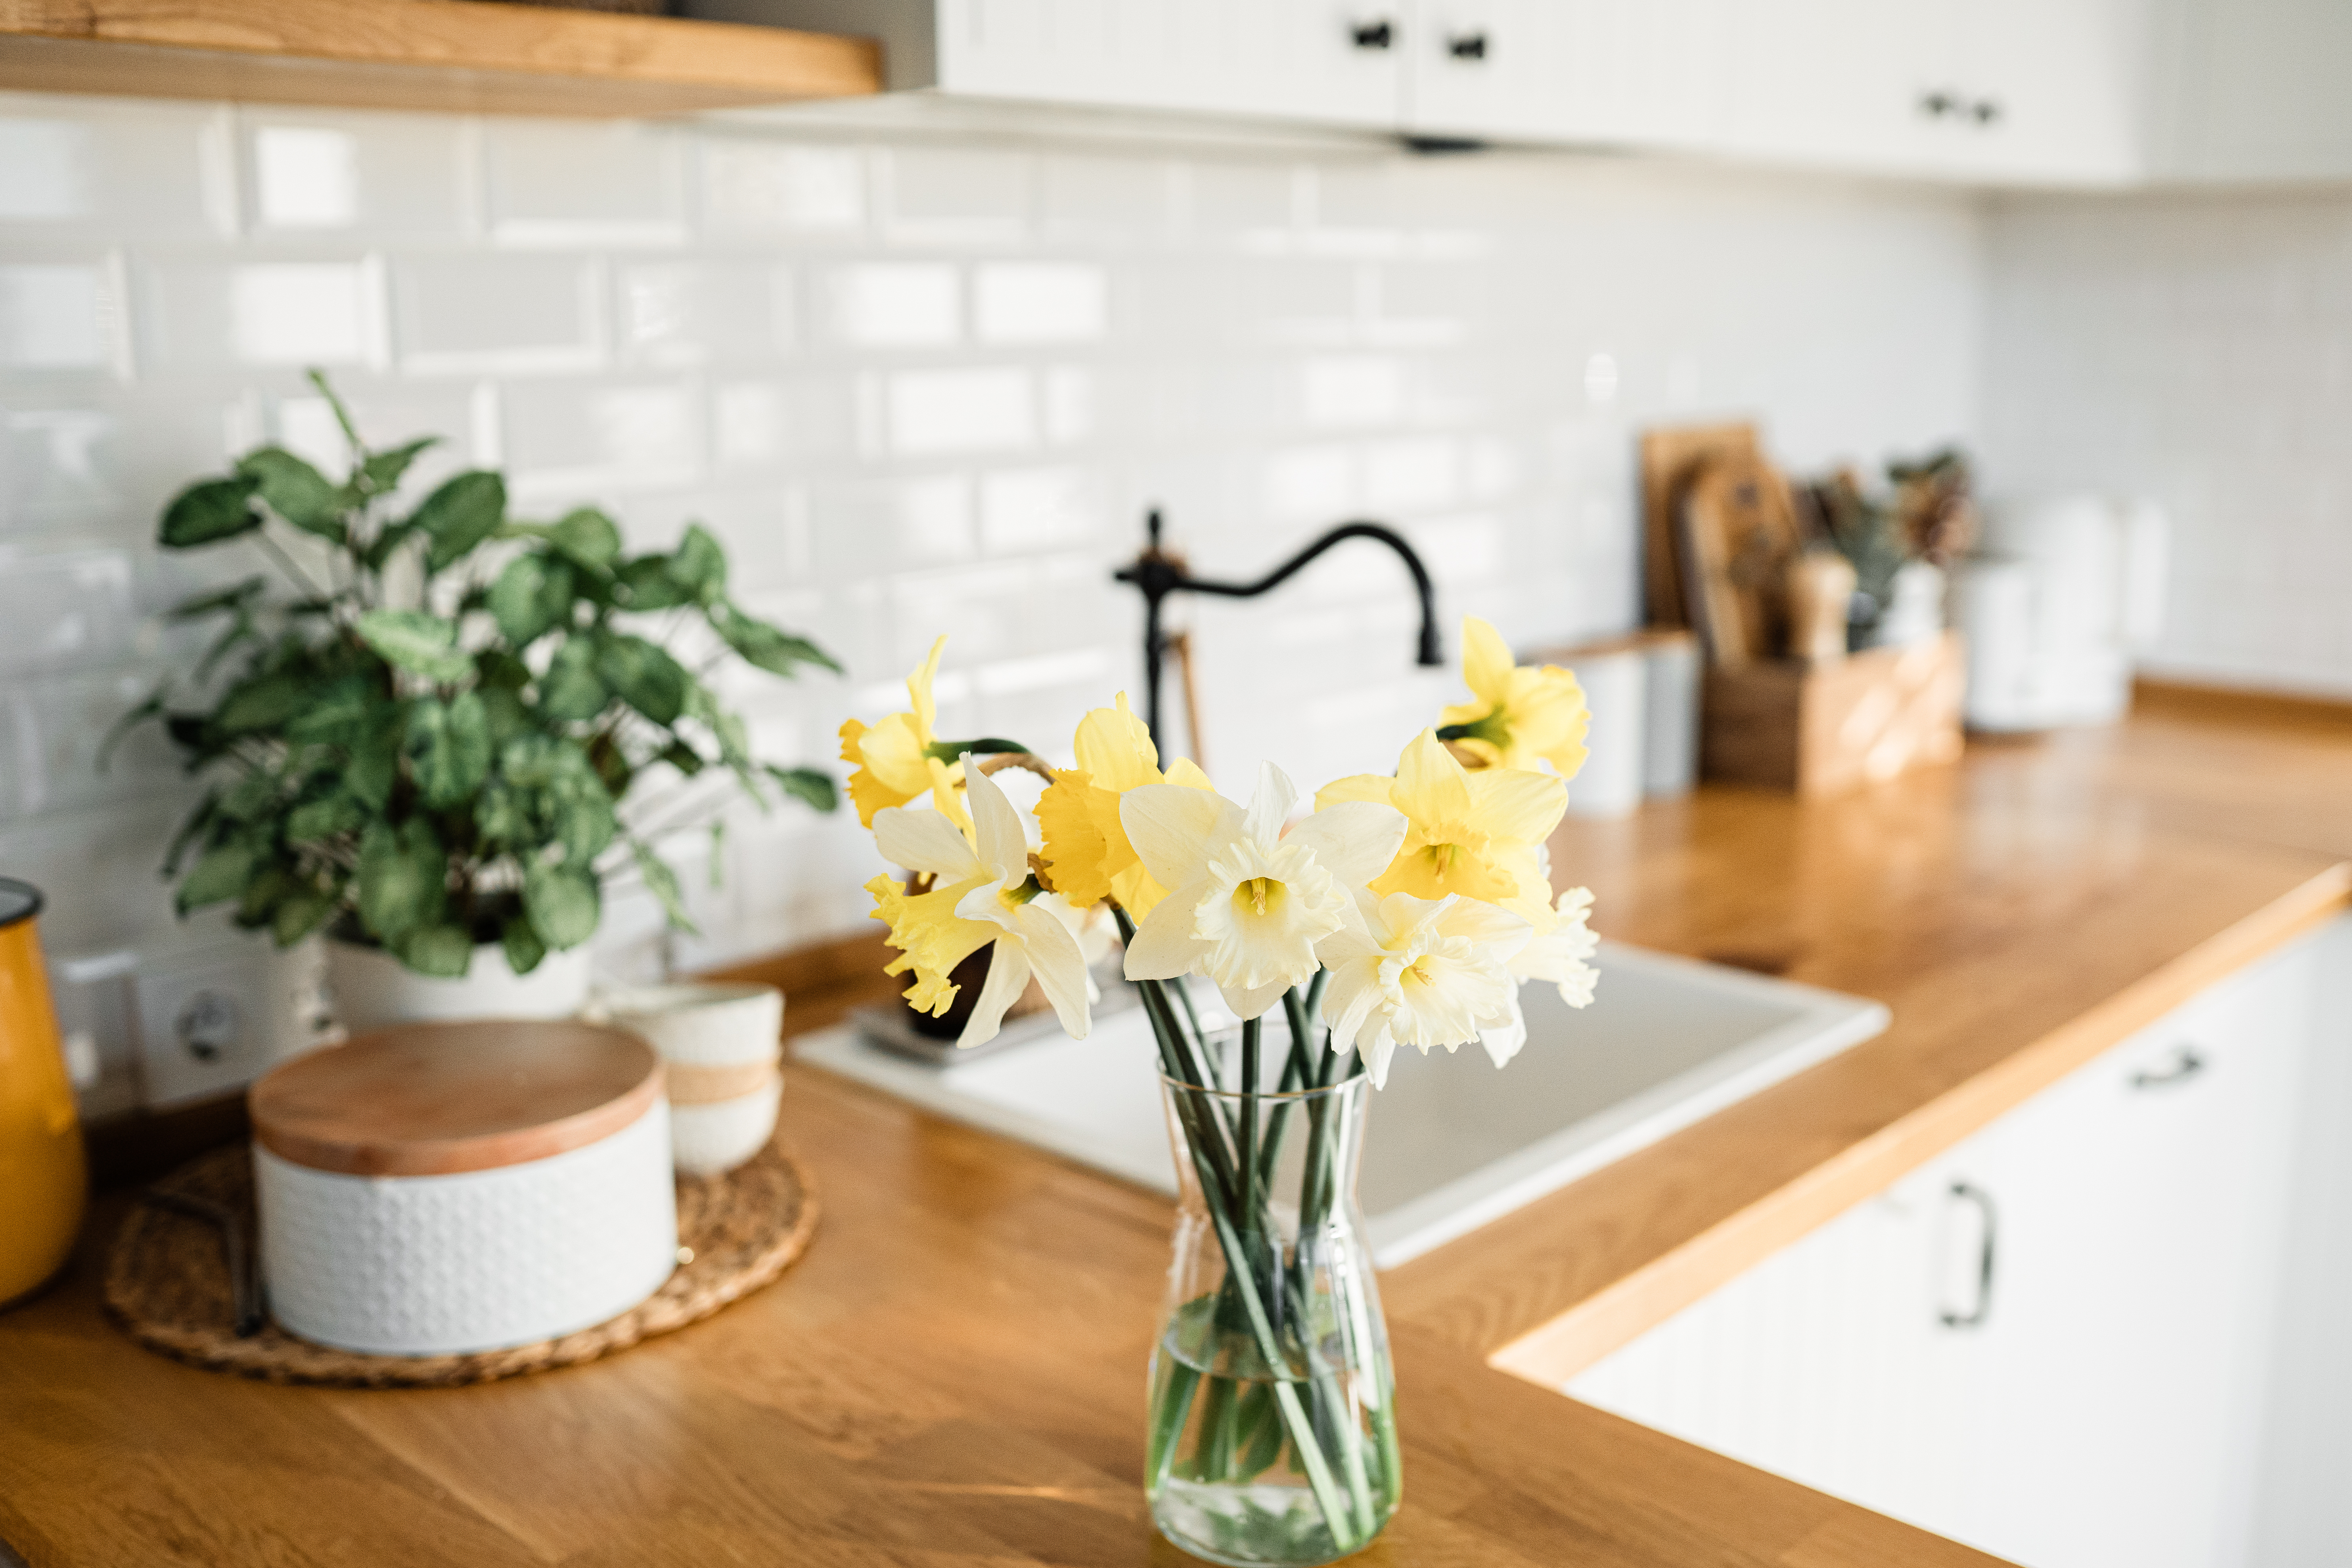 Nothing brightens up a room quite like a vase filled with blooming yellow daffodils